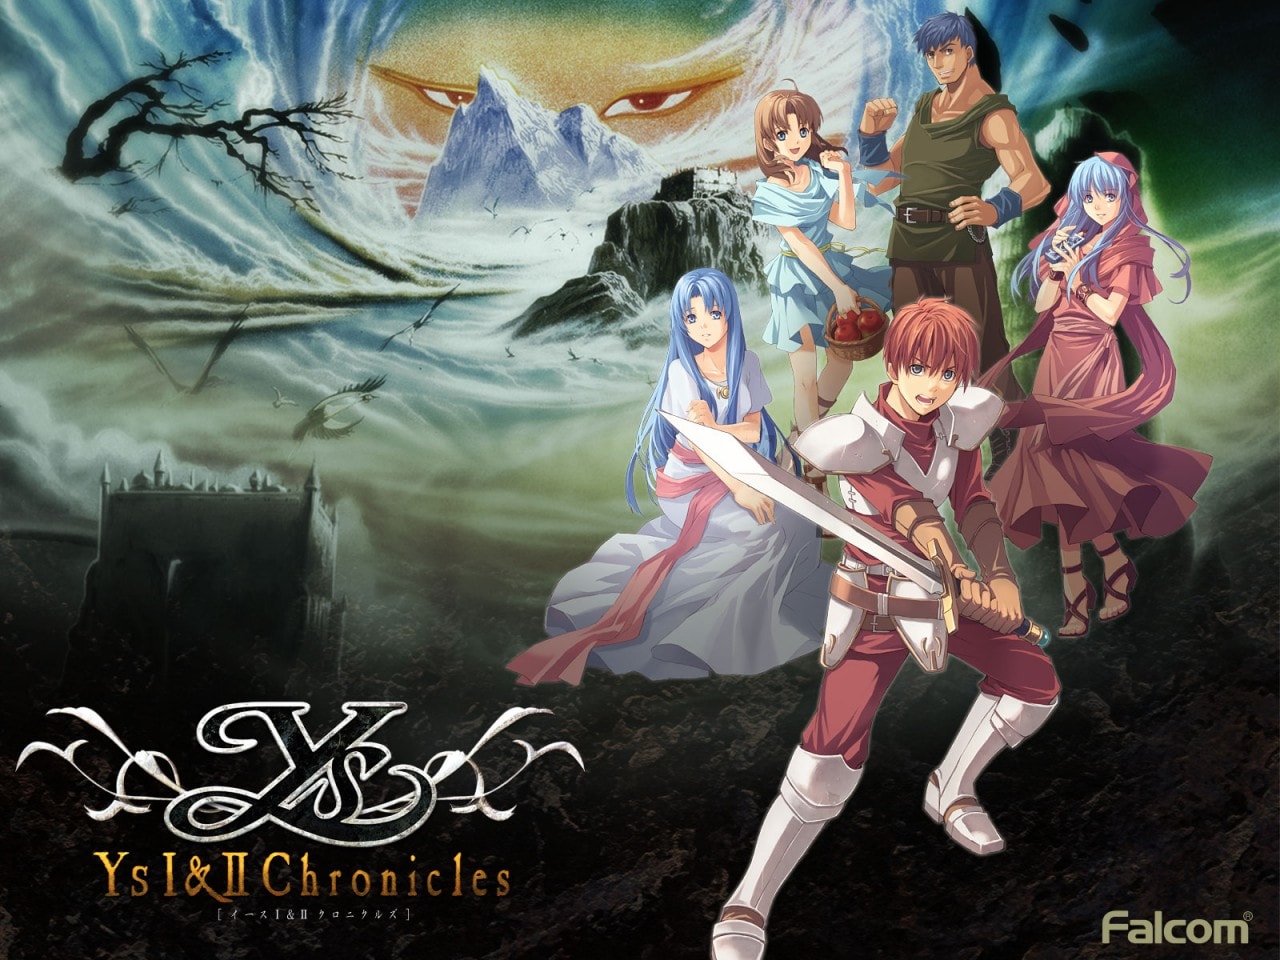 Il JRPG Ys Chronicles - Ys I: Ancient Ys Vanished disponibile per Android e iOS (foto e video)